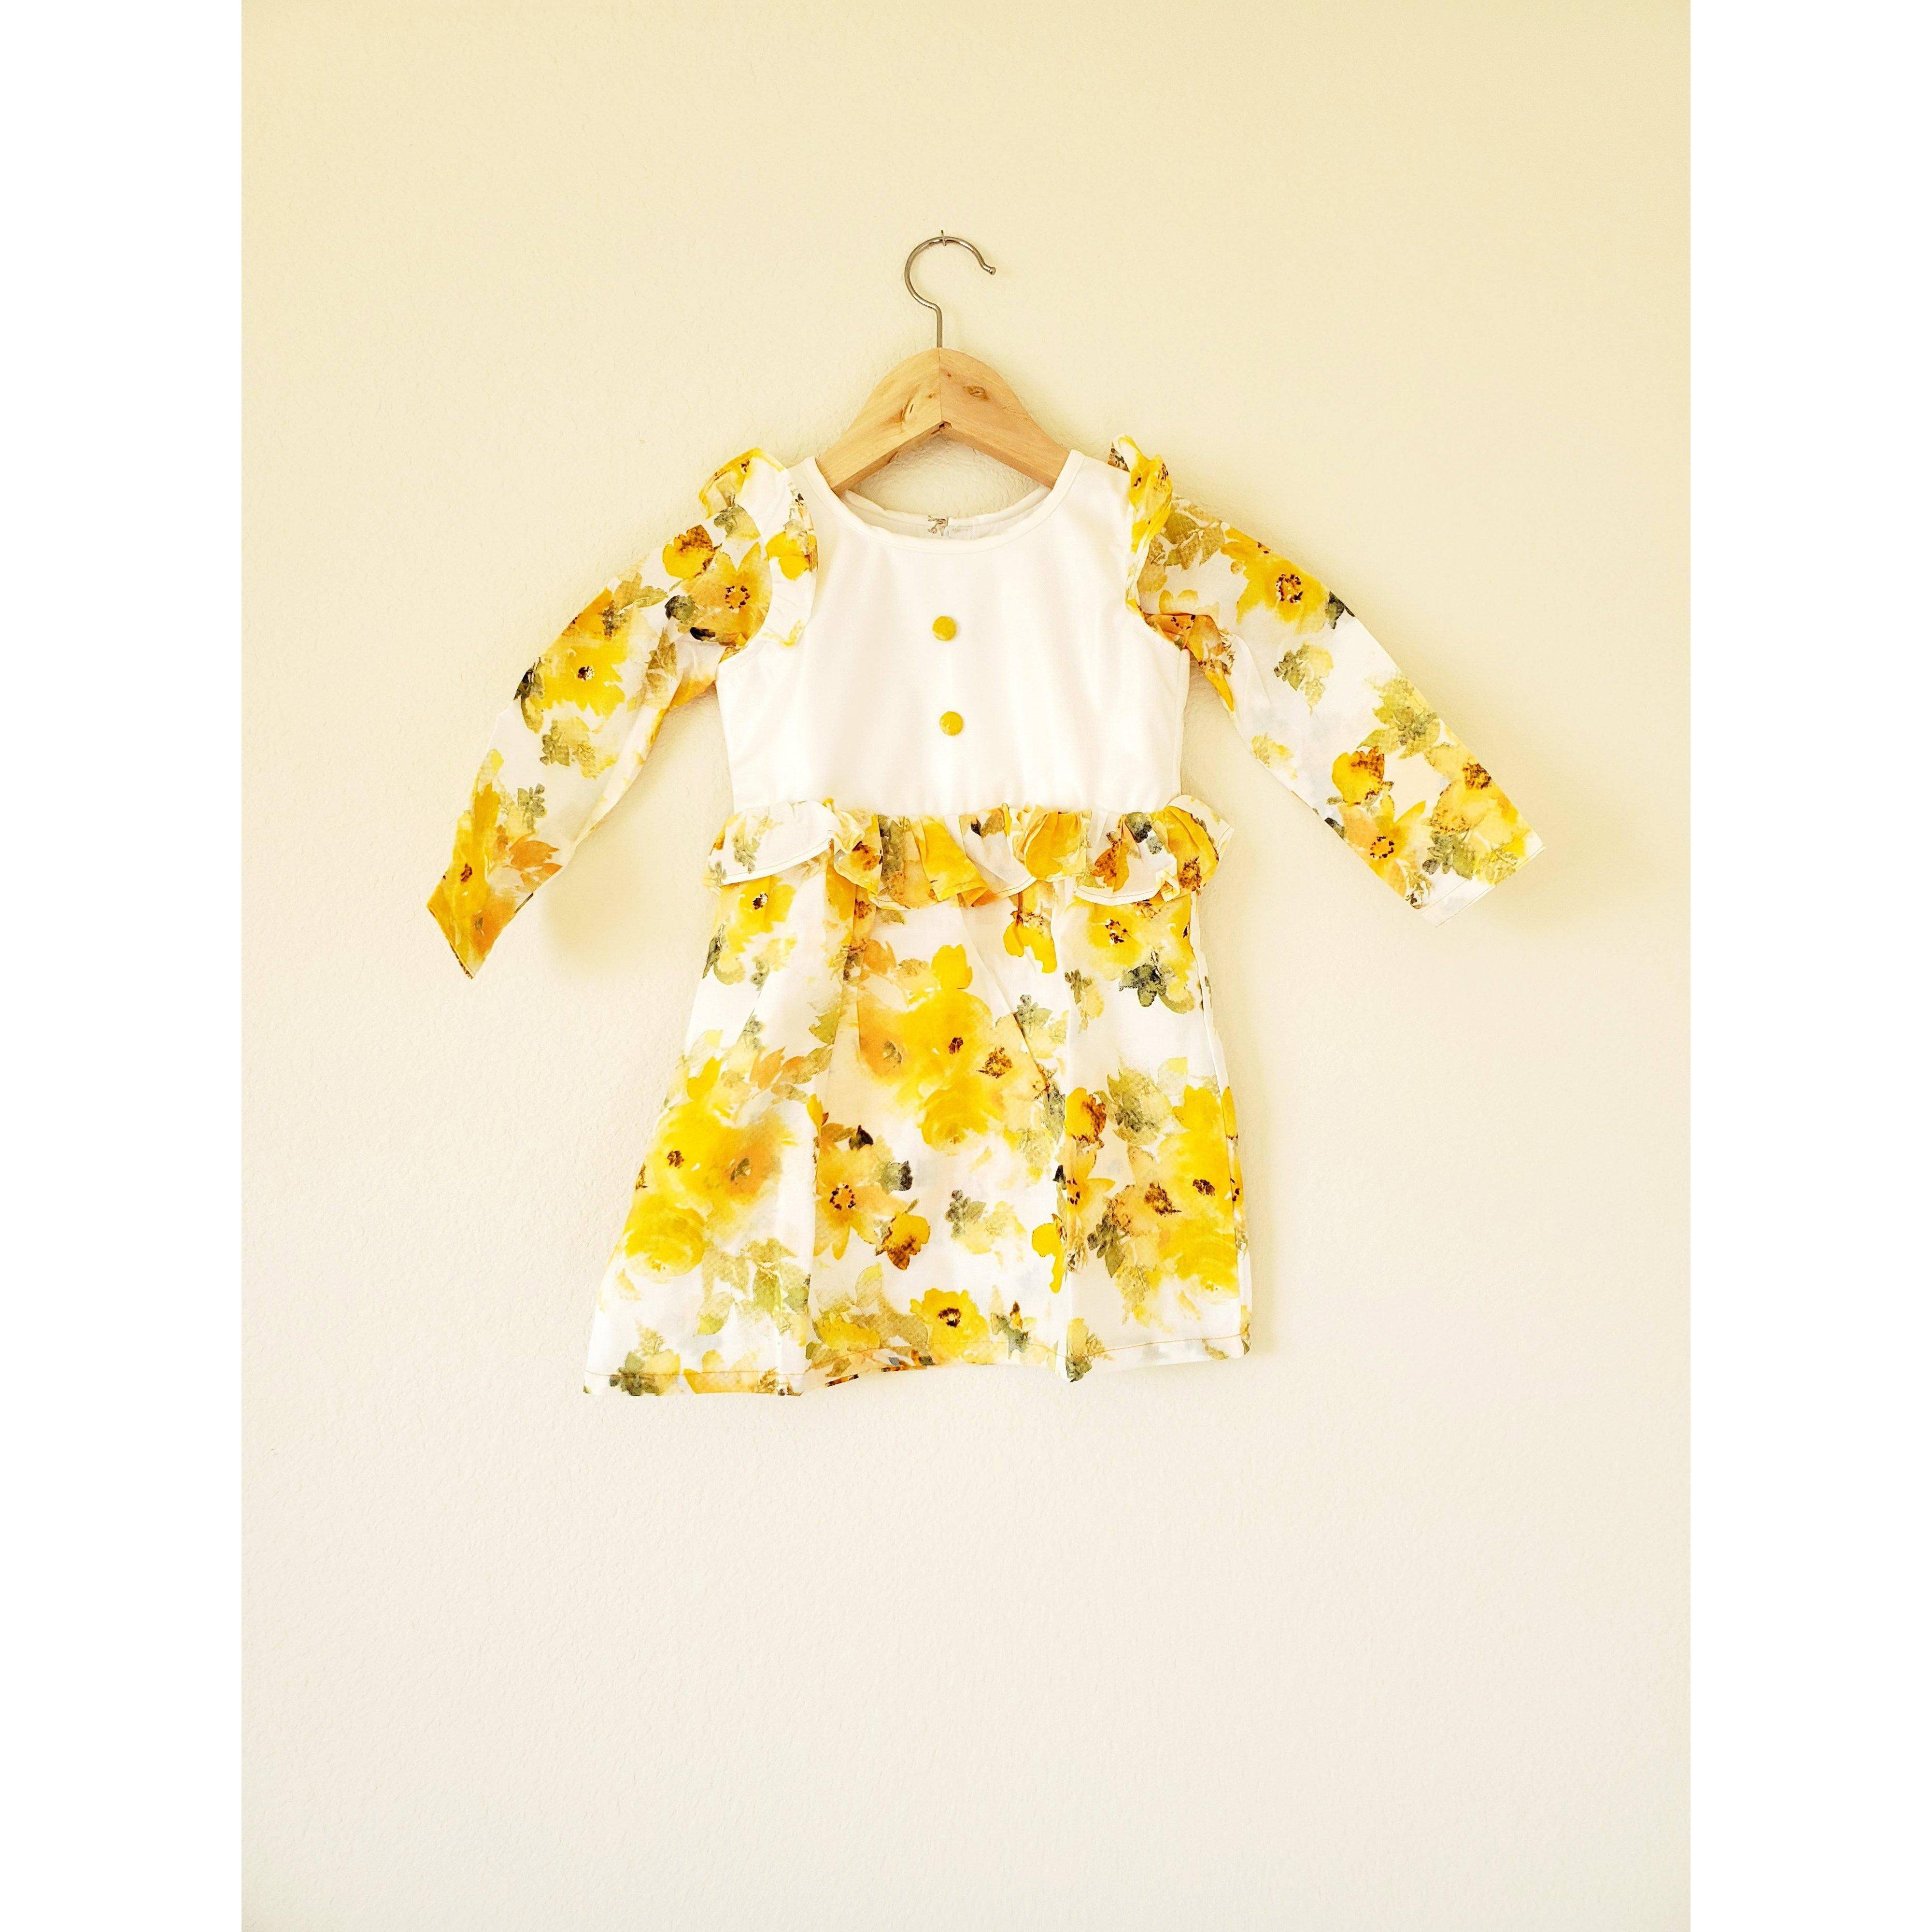 Yellow Stain-Proof Toddler Printed Floral Dress - Snug Bub USA